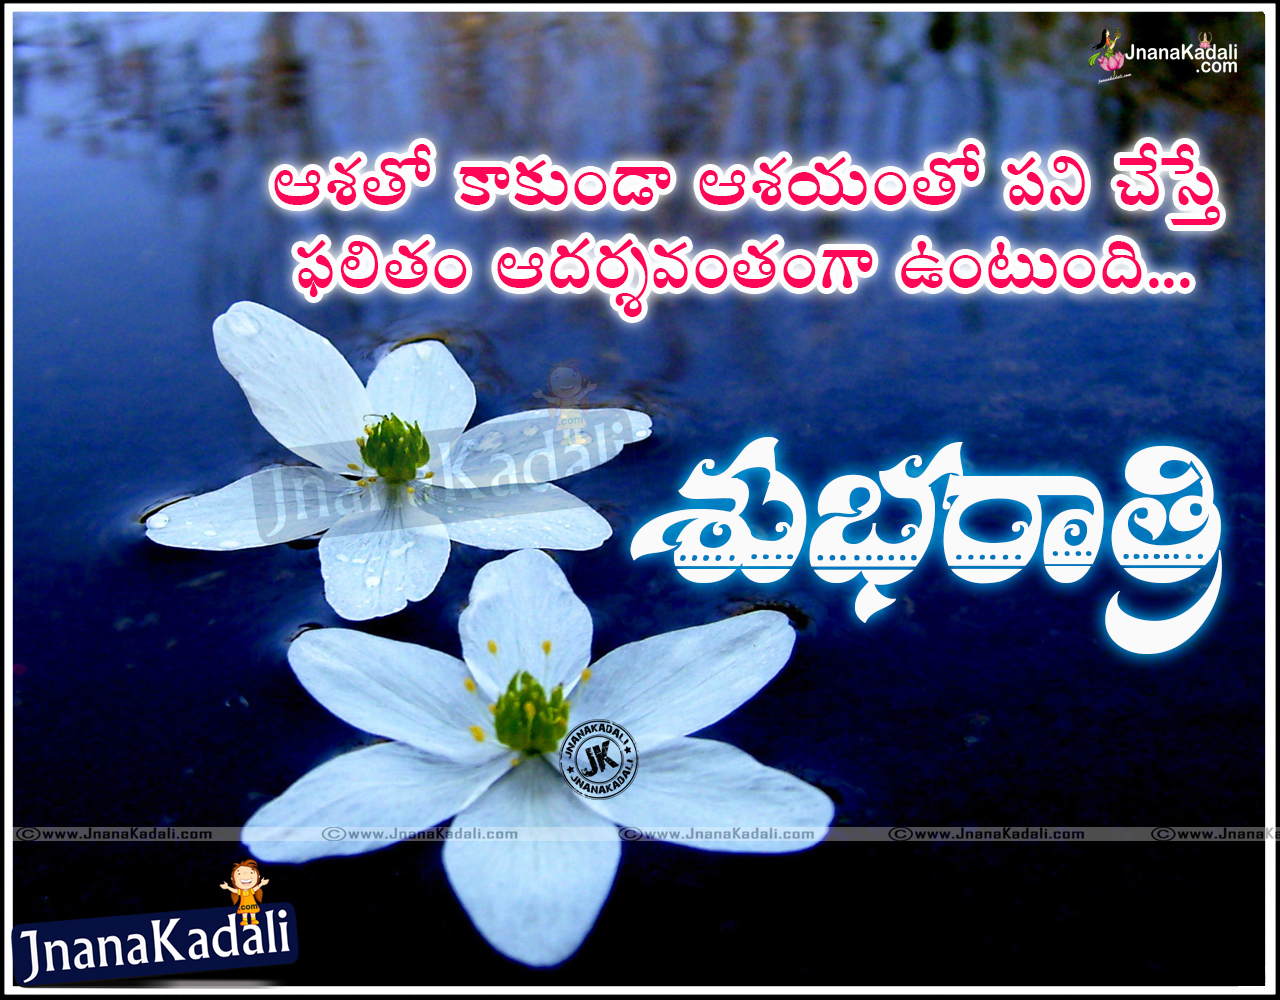 Telugu Nice Good Night Thoughts and Quotes with Images | JNANA ...